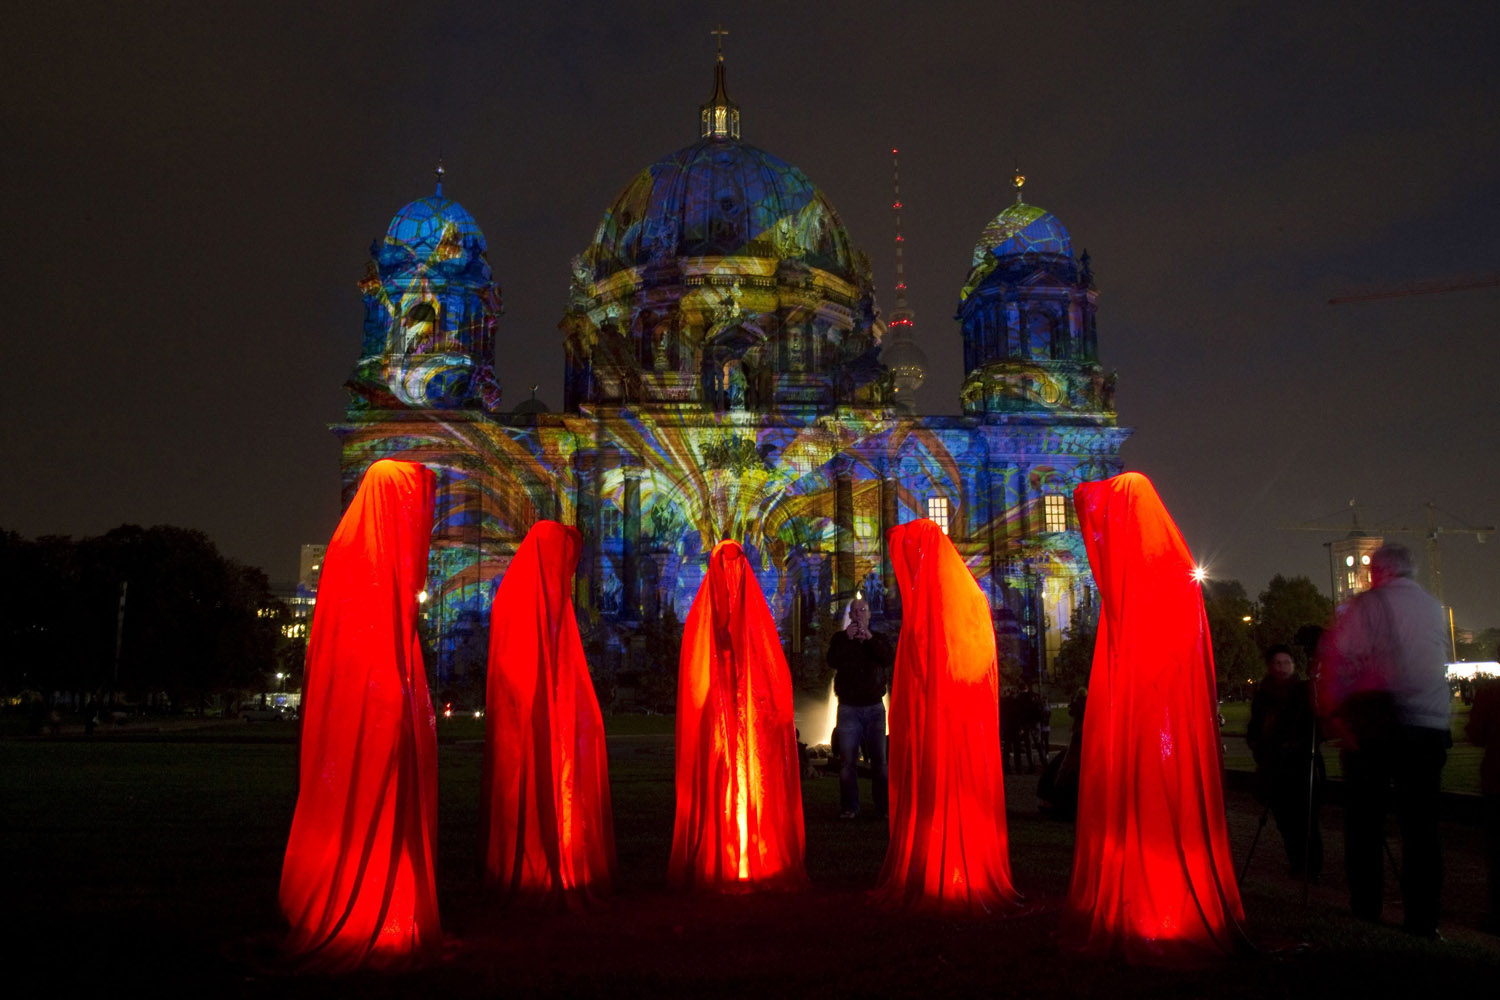 People look at a light installation during the opening day of the "Festival of Light" show in Berlin